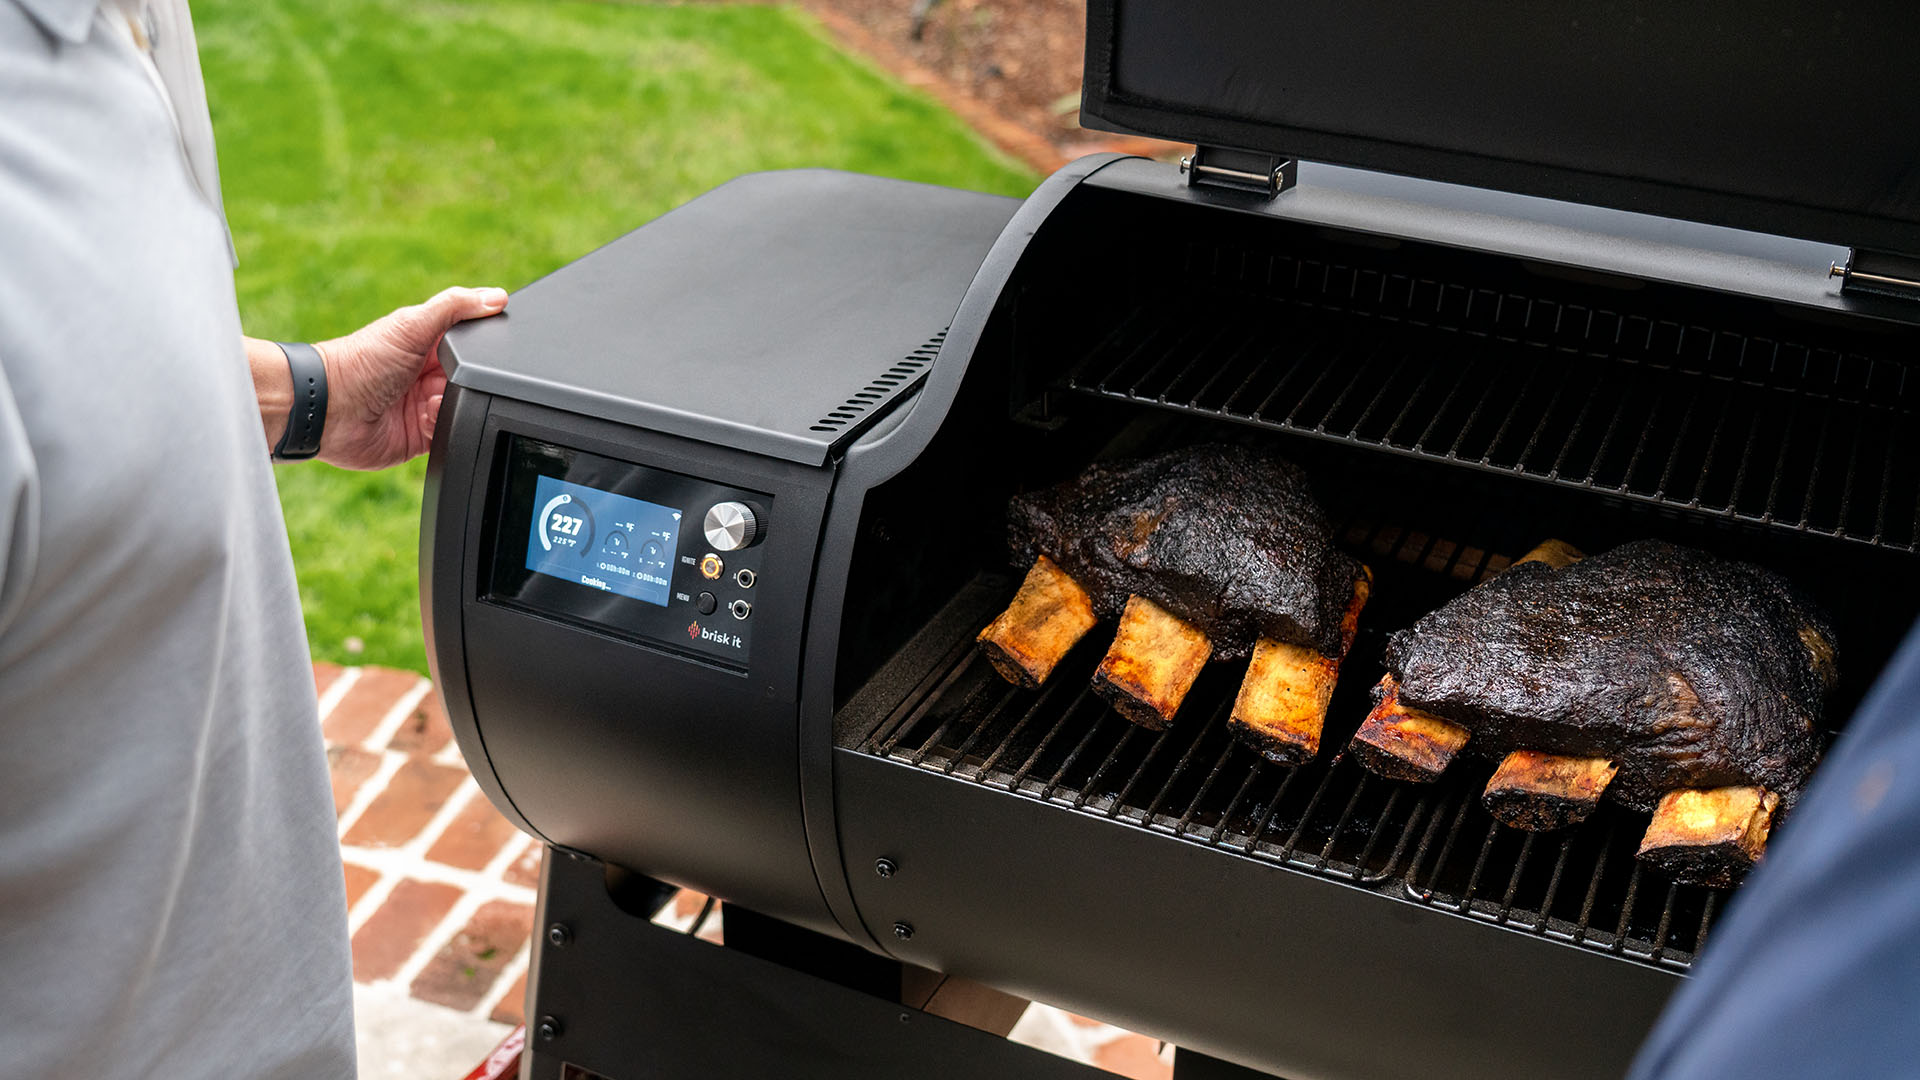 Brisk It Origin-580 pellet grill with ribs cooking